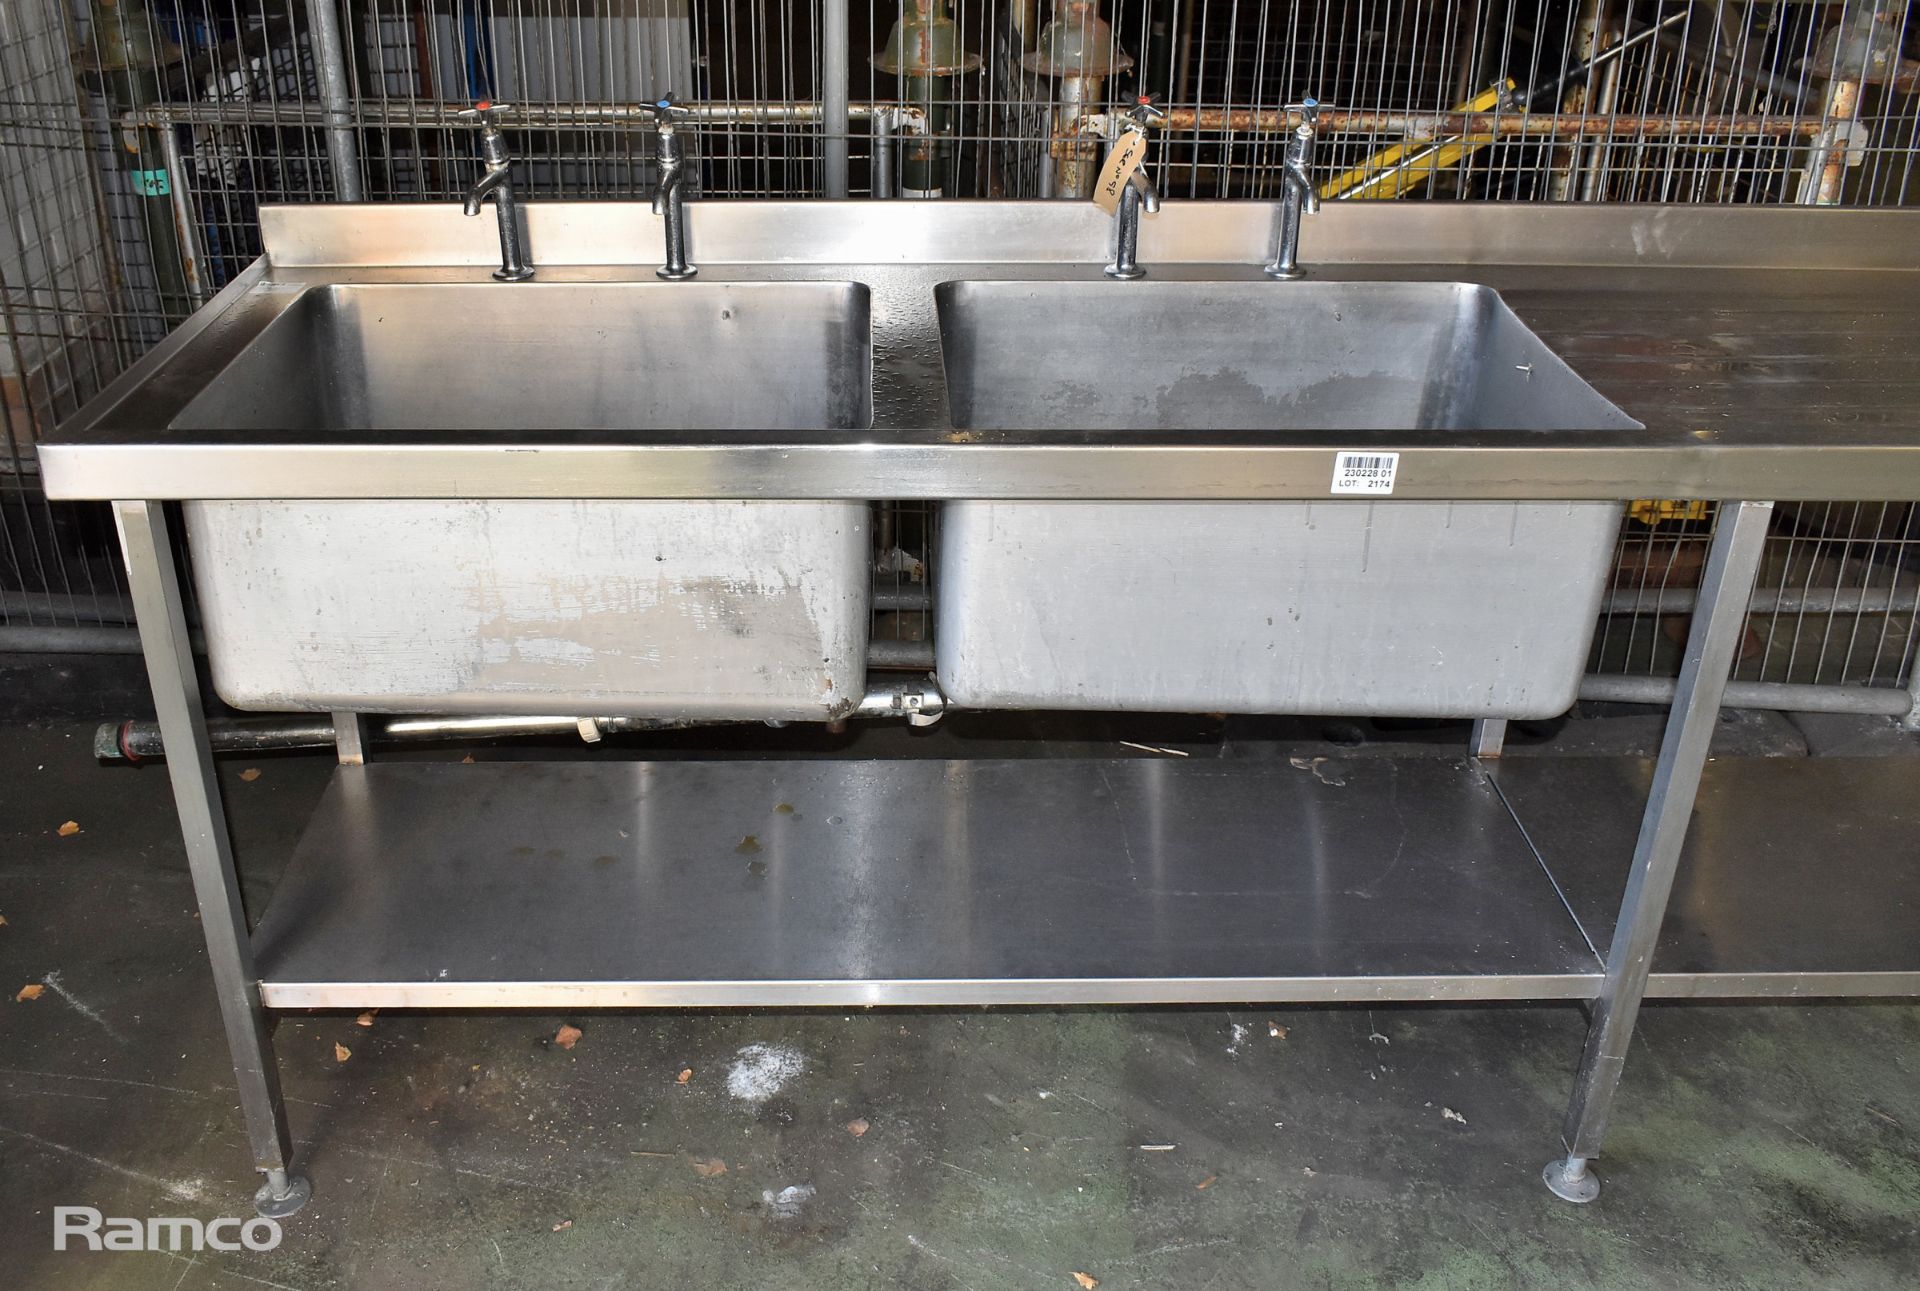 Stainless steel double sink unit with waste disposal - 310x80x100cm - Image 2 of 8